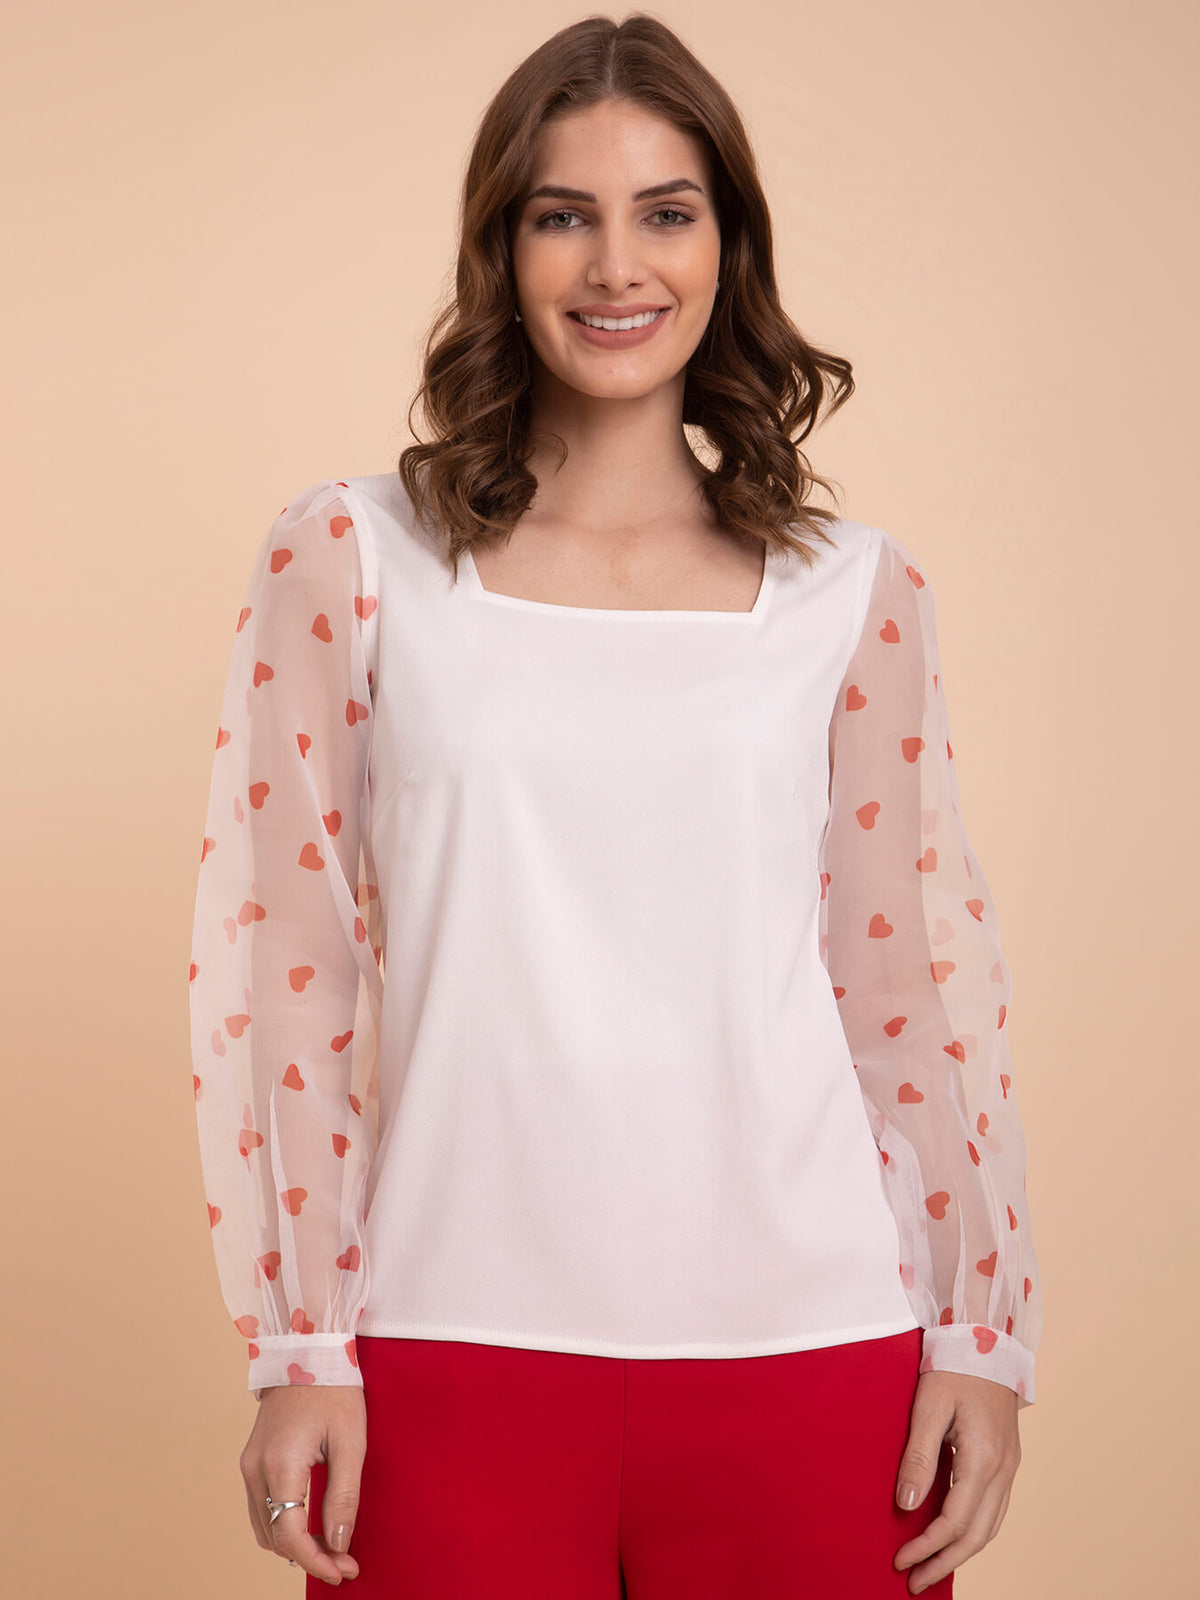 Organza Square Neck Top - White And Red